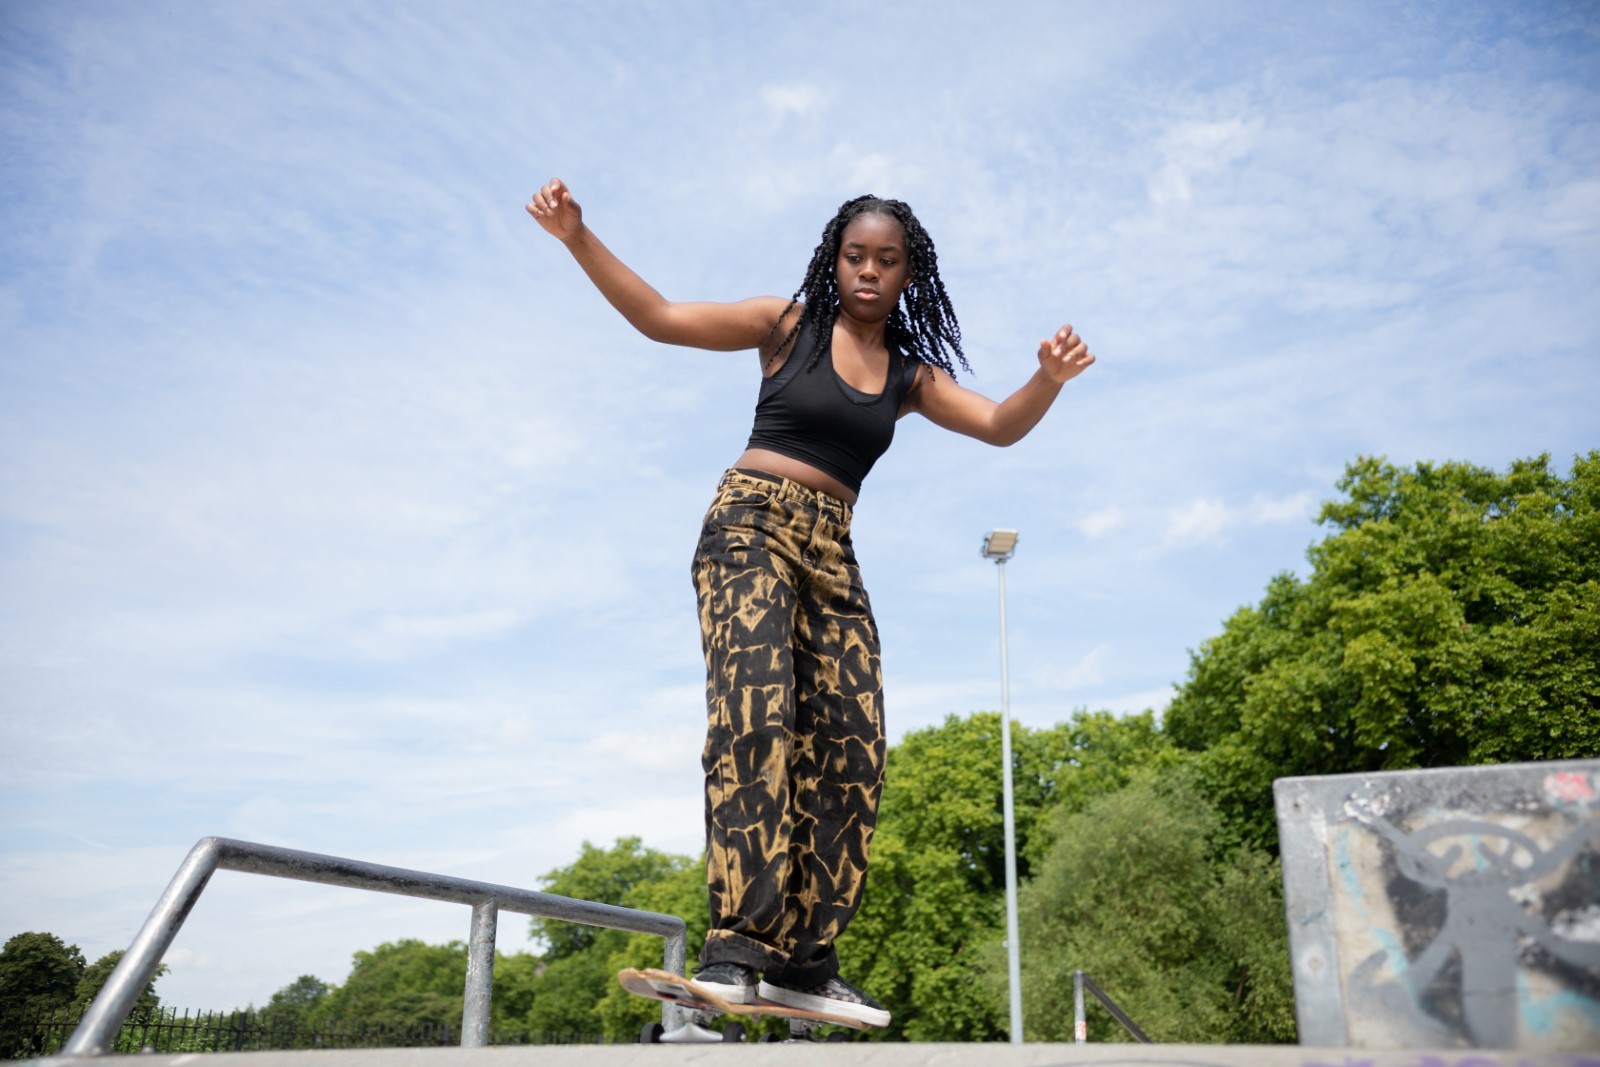 Image shows young woman skateboarding over a ramp